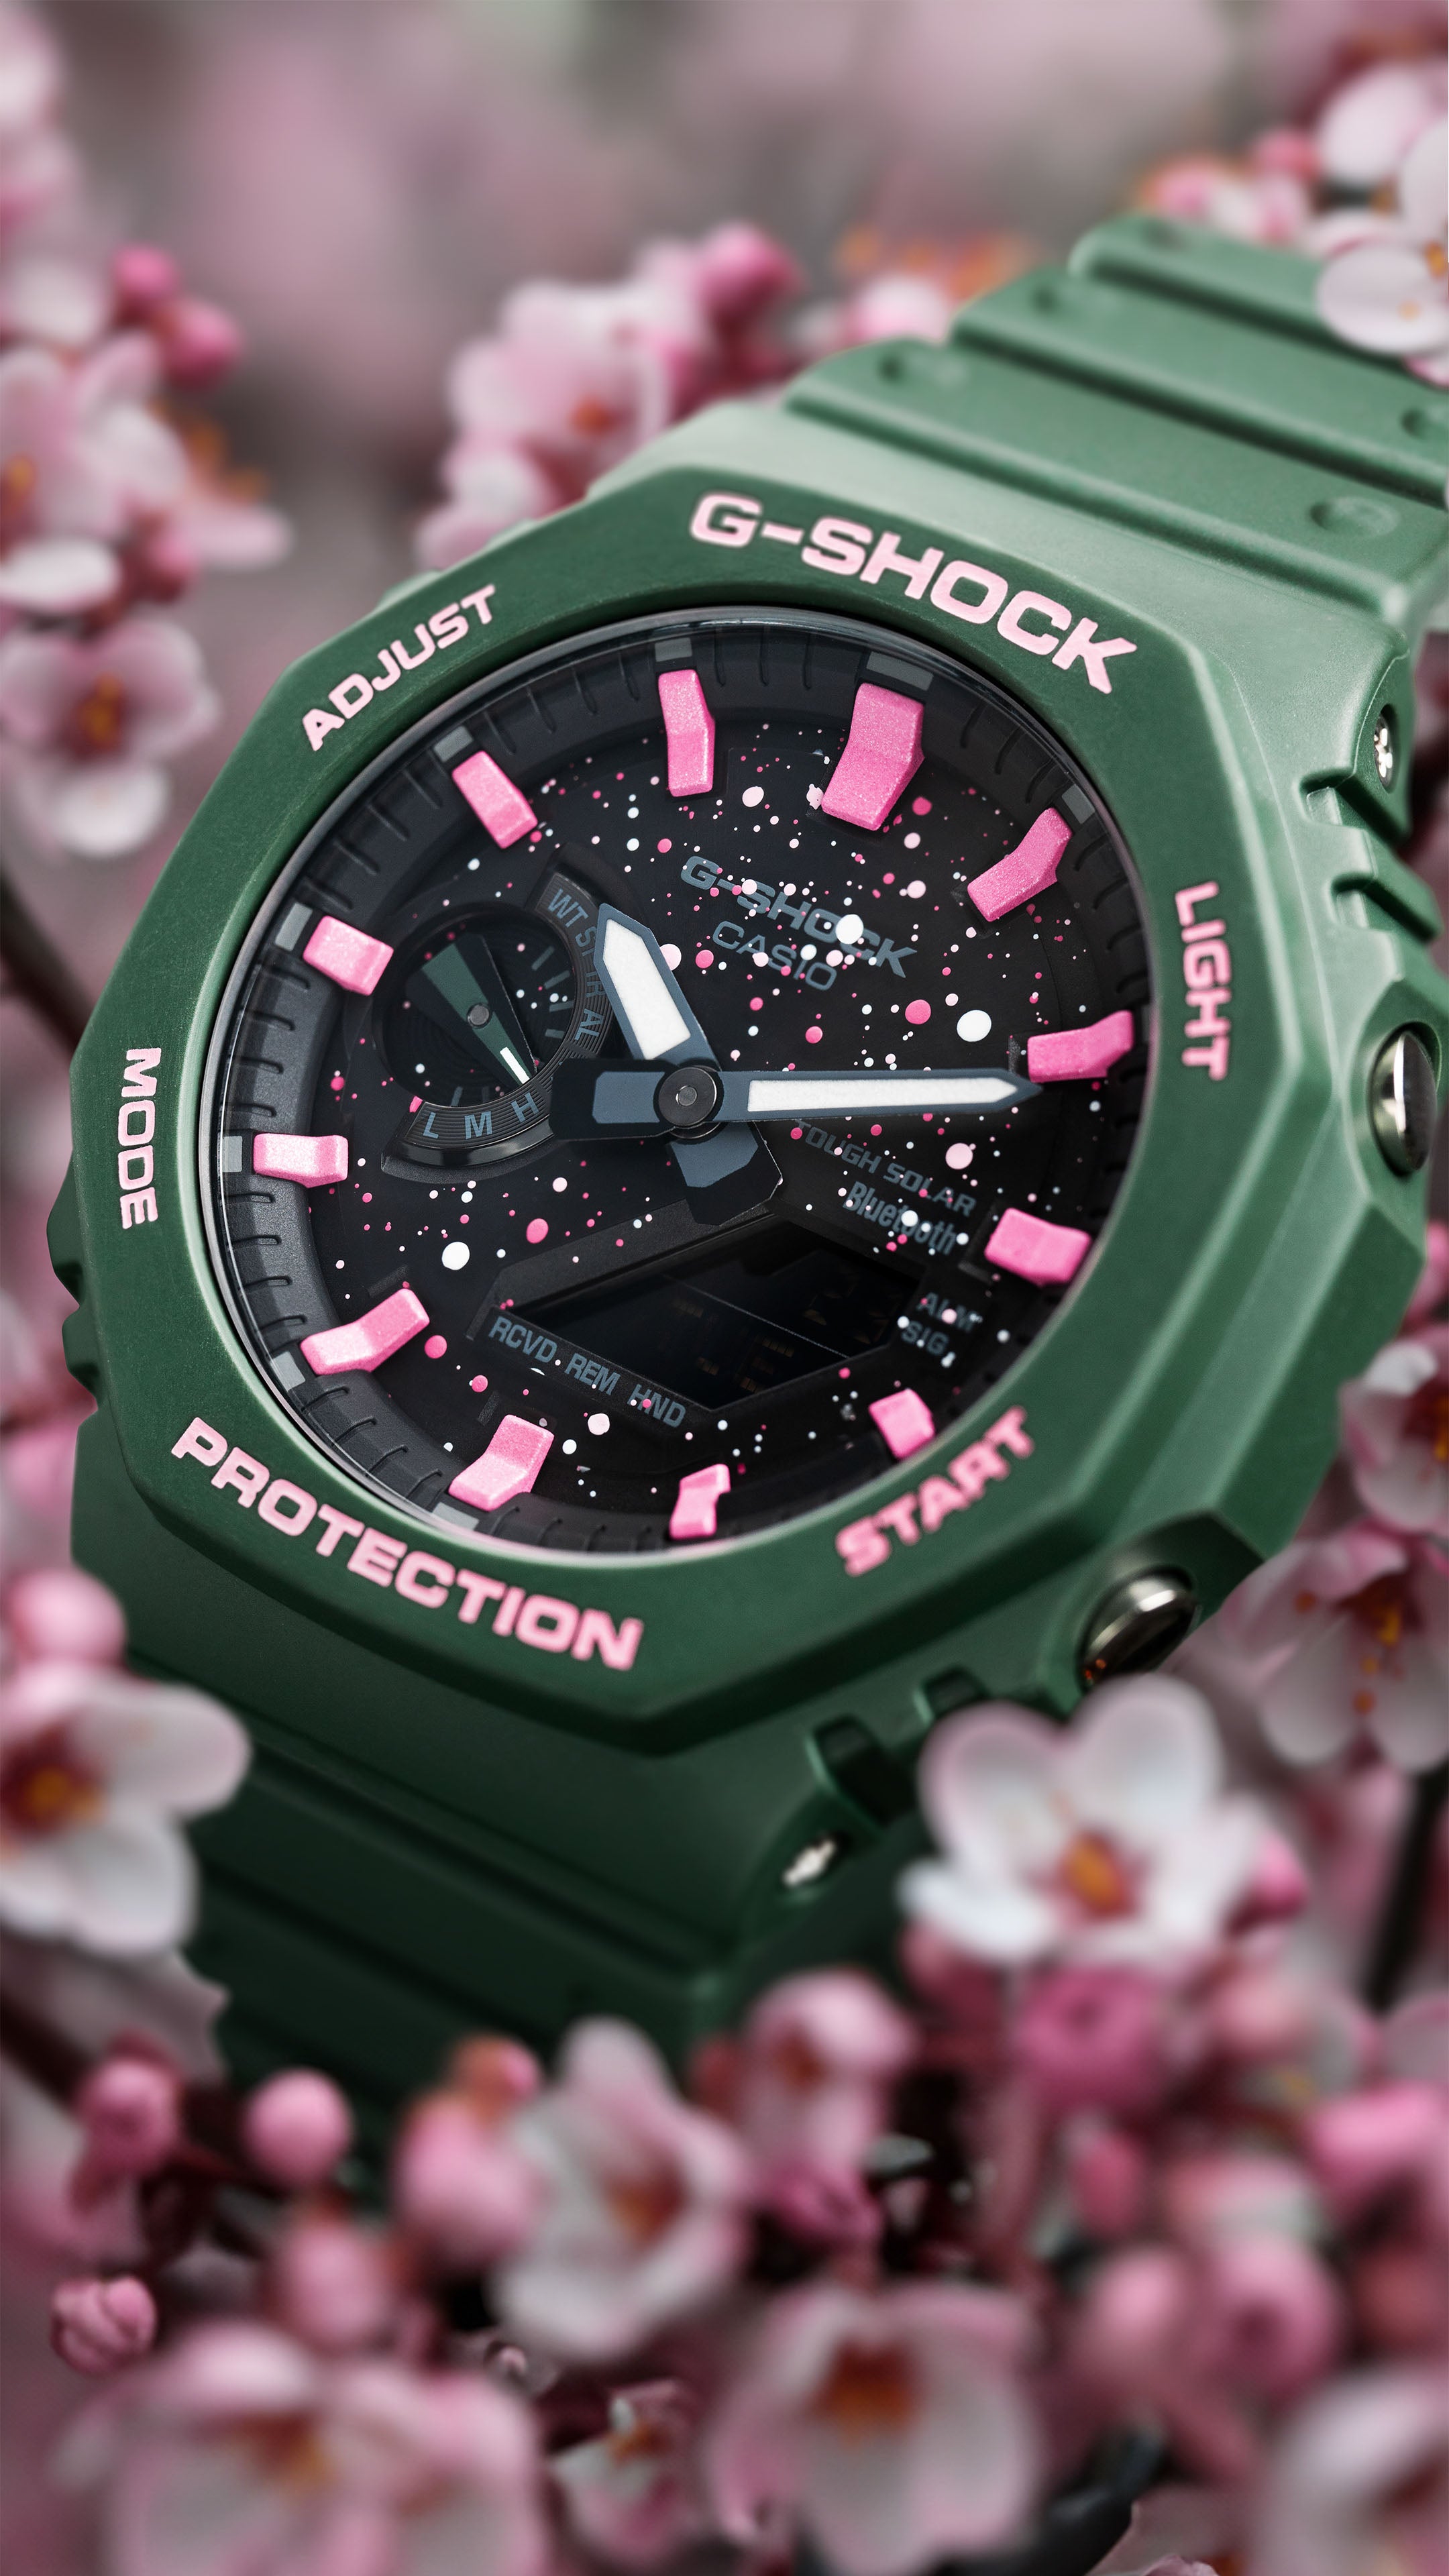 Limited Edition G-Shock CasiOak with Hand-Painted Cherry Blossoms - Unique Collector's Timepiece